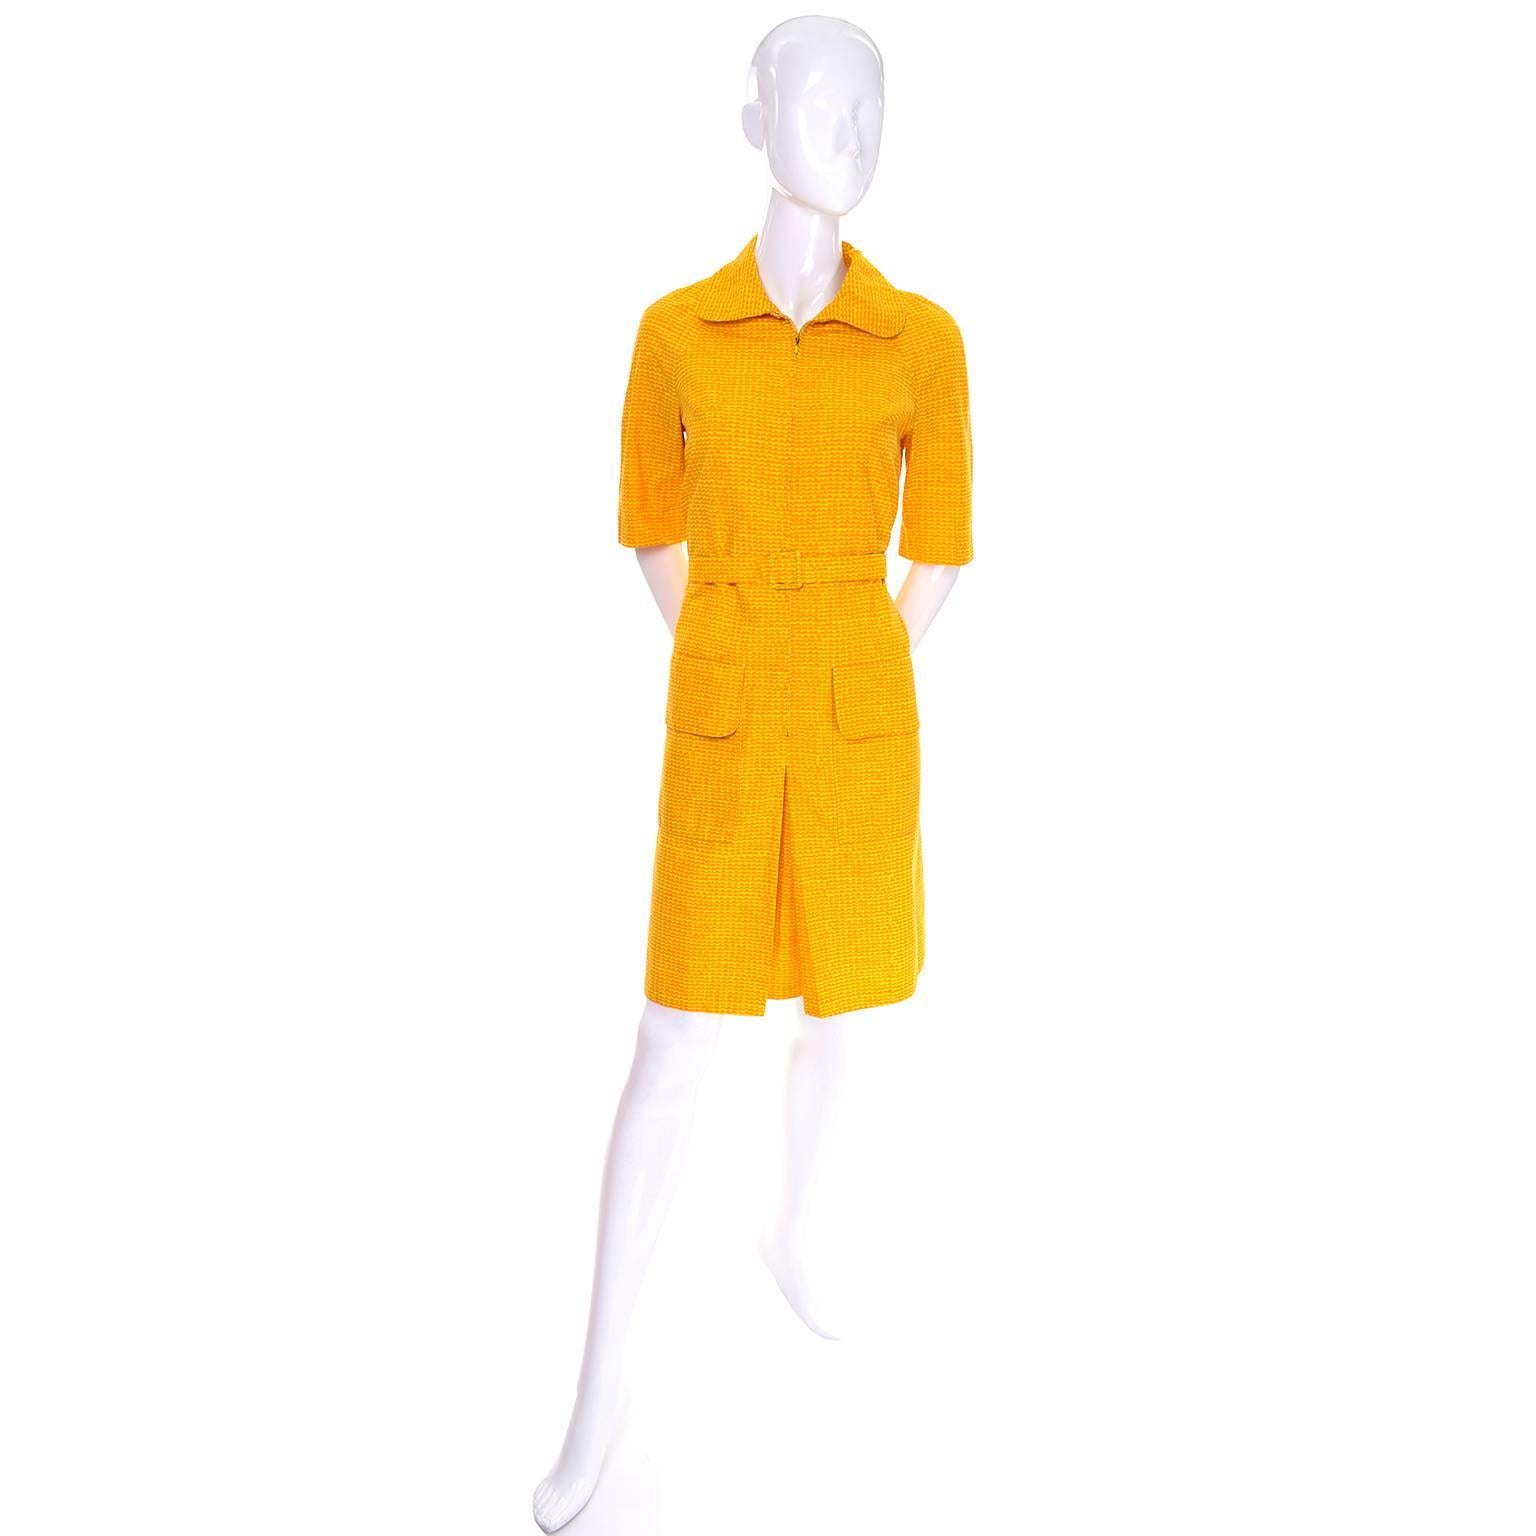 This is an adorable sun dress by Marimekko that zips down to the beginning of the central pleat in the skirt. This yellow dress has bands of orange mounds creating a pattern that almost looks like waves. It has two flap pockets at the hip and short